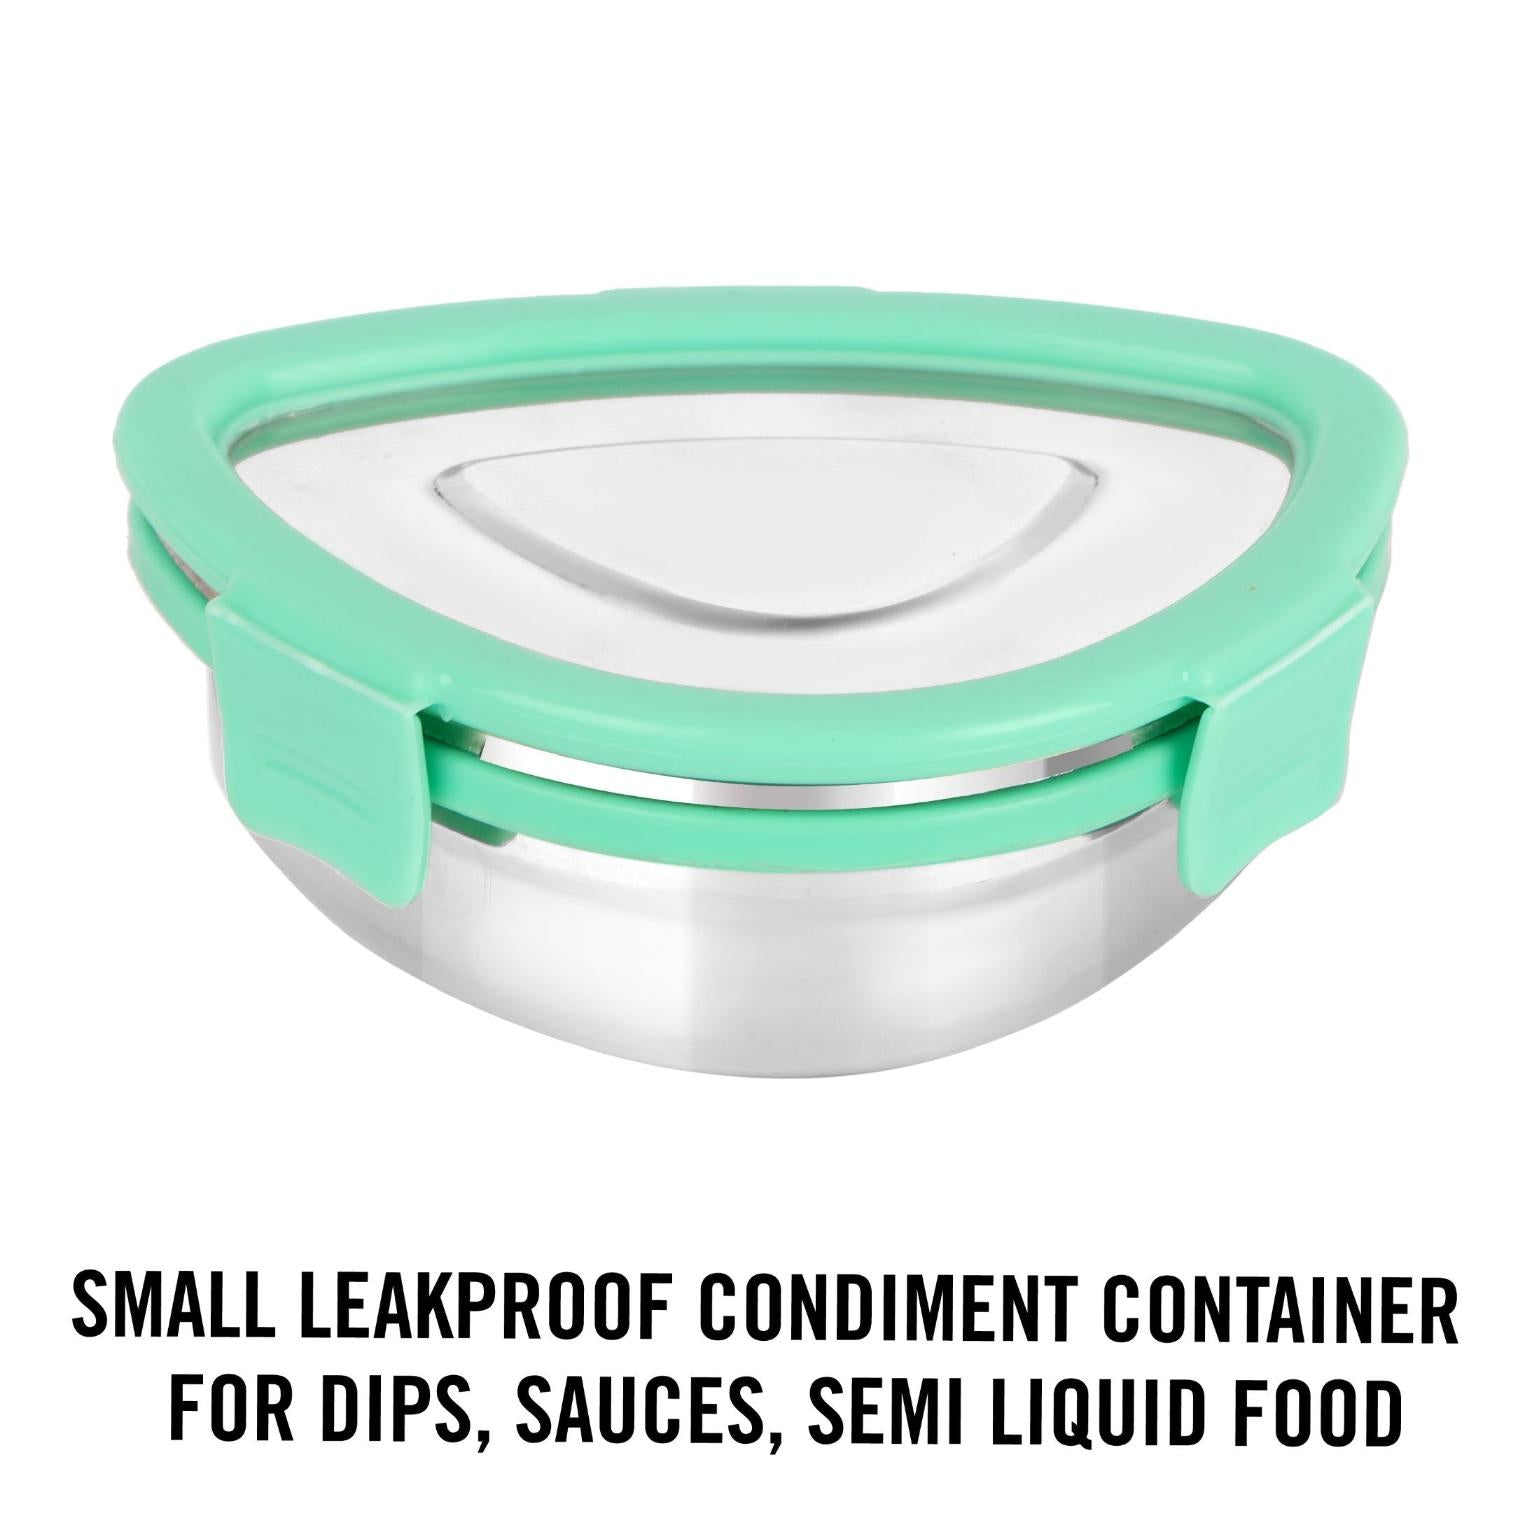 Oval Eat Insulated Lunch Box Green